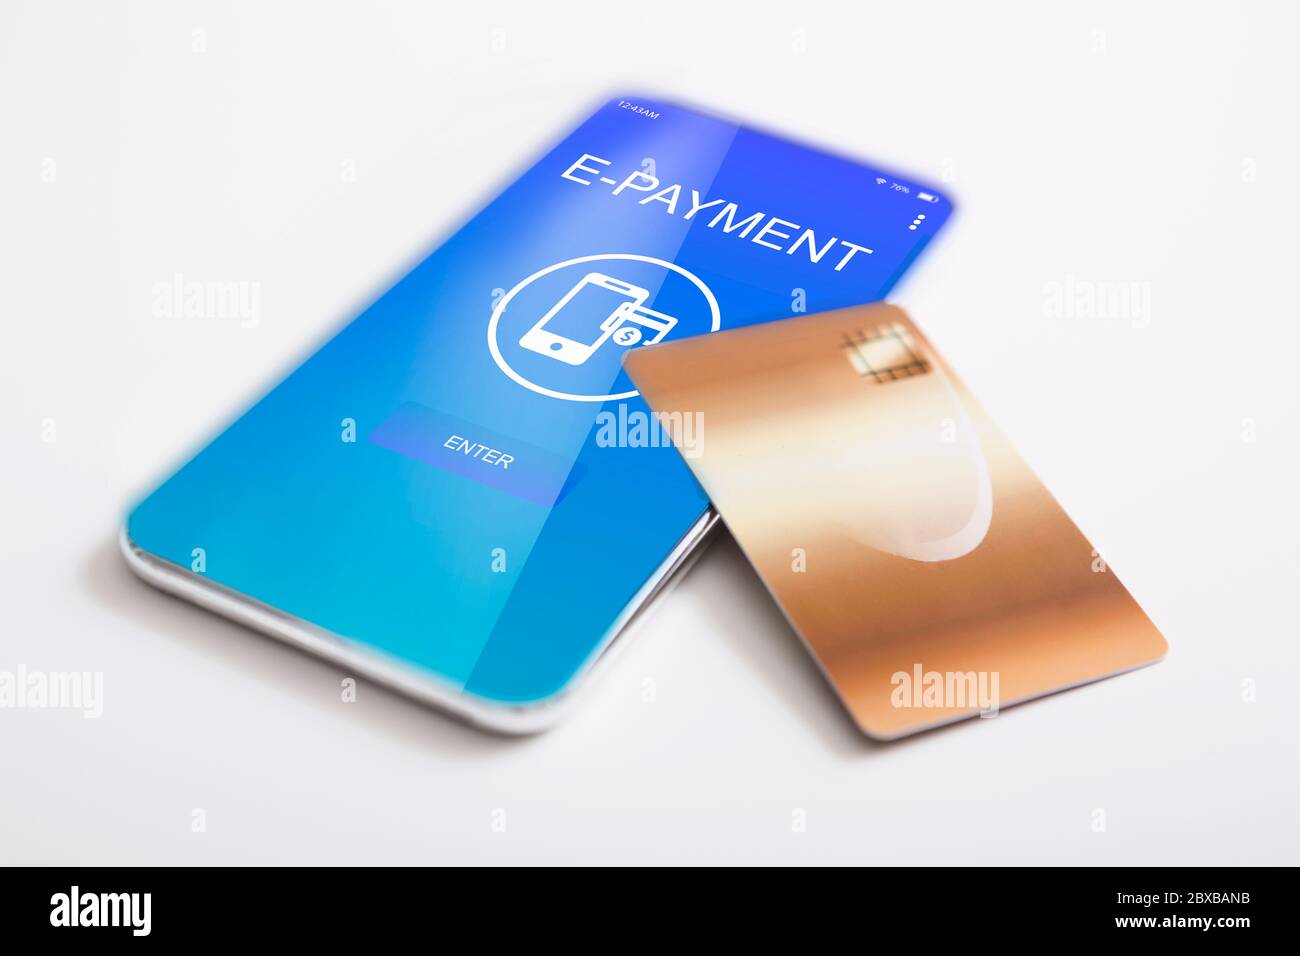 E-Payment. Collage Of Smartphone With Opened Money Transfers App And Credit Card Stock Photo